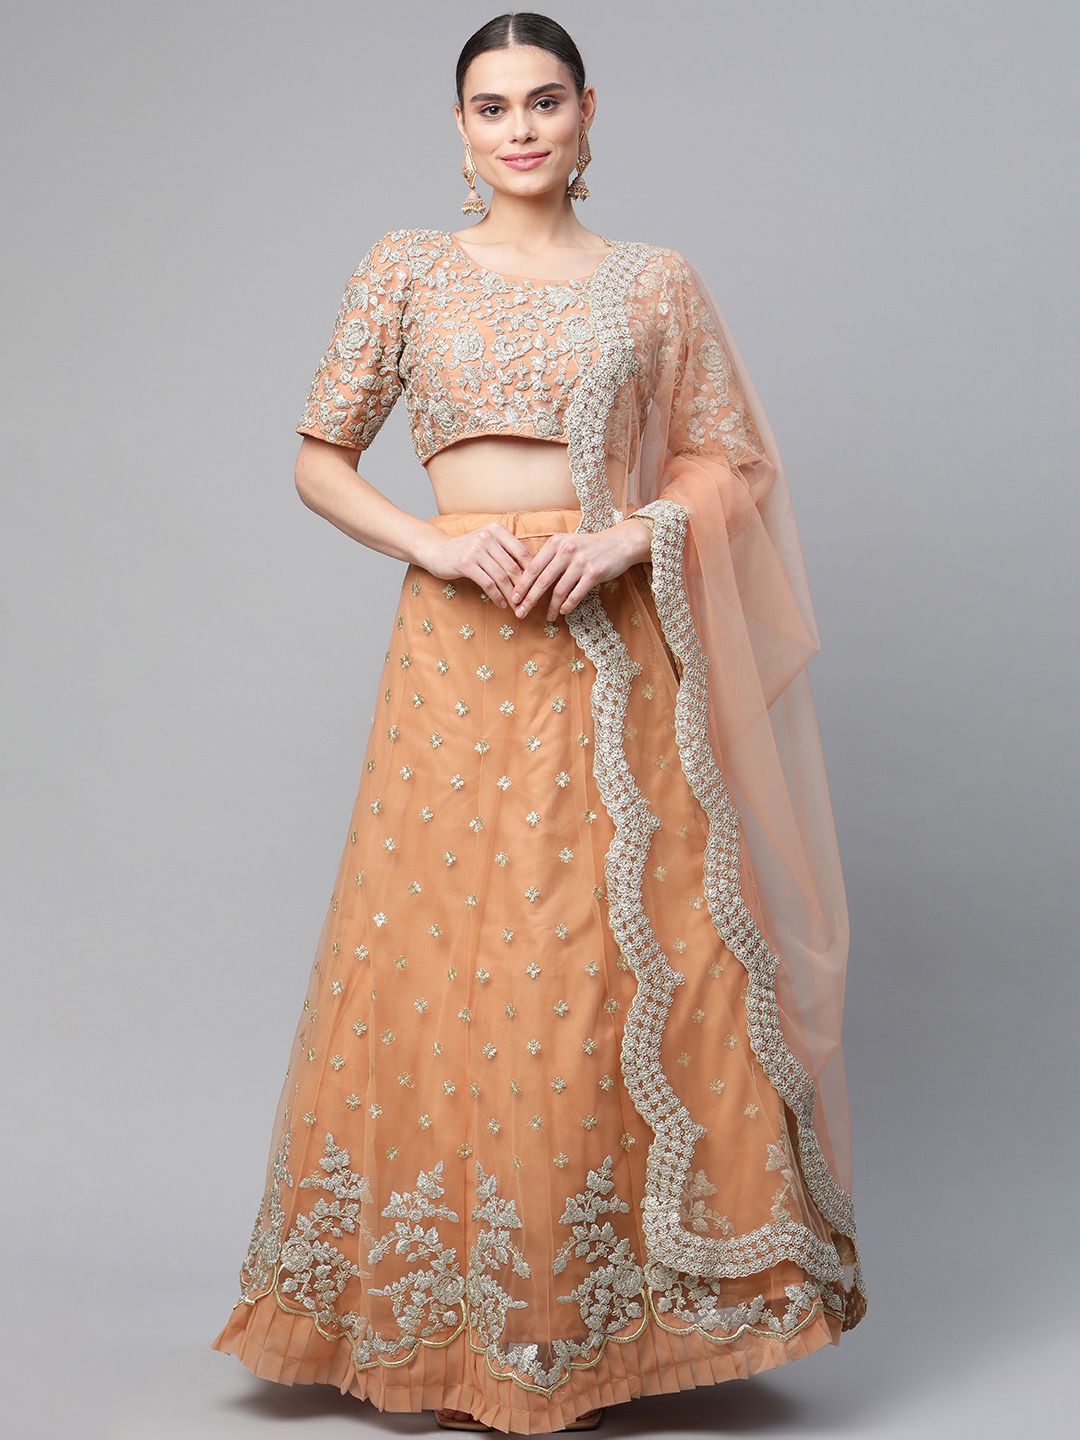 Readiprint Fashions Peach-Coloured & Gold-Toned Semi-Stitched Lehenga & Unstitched Blouse Price in India